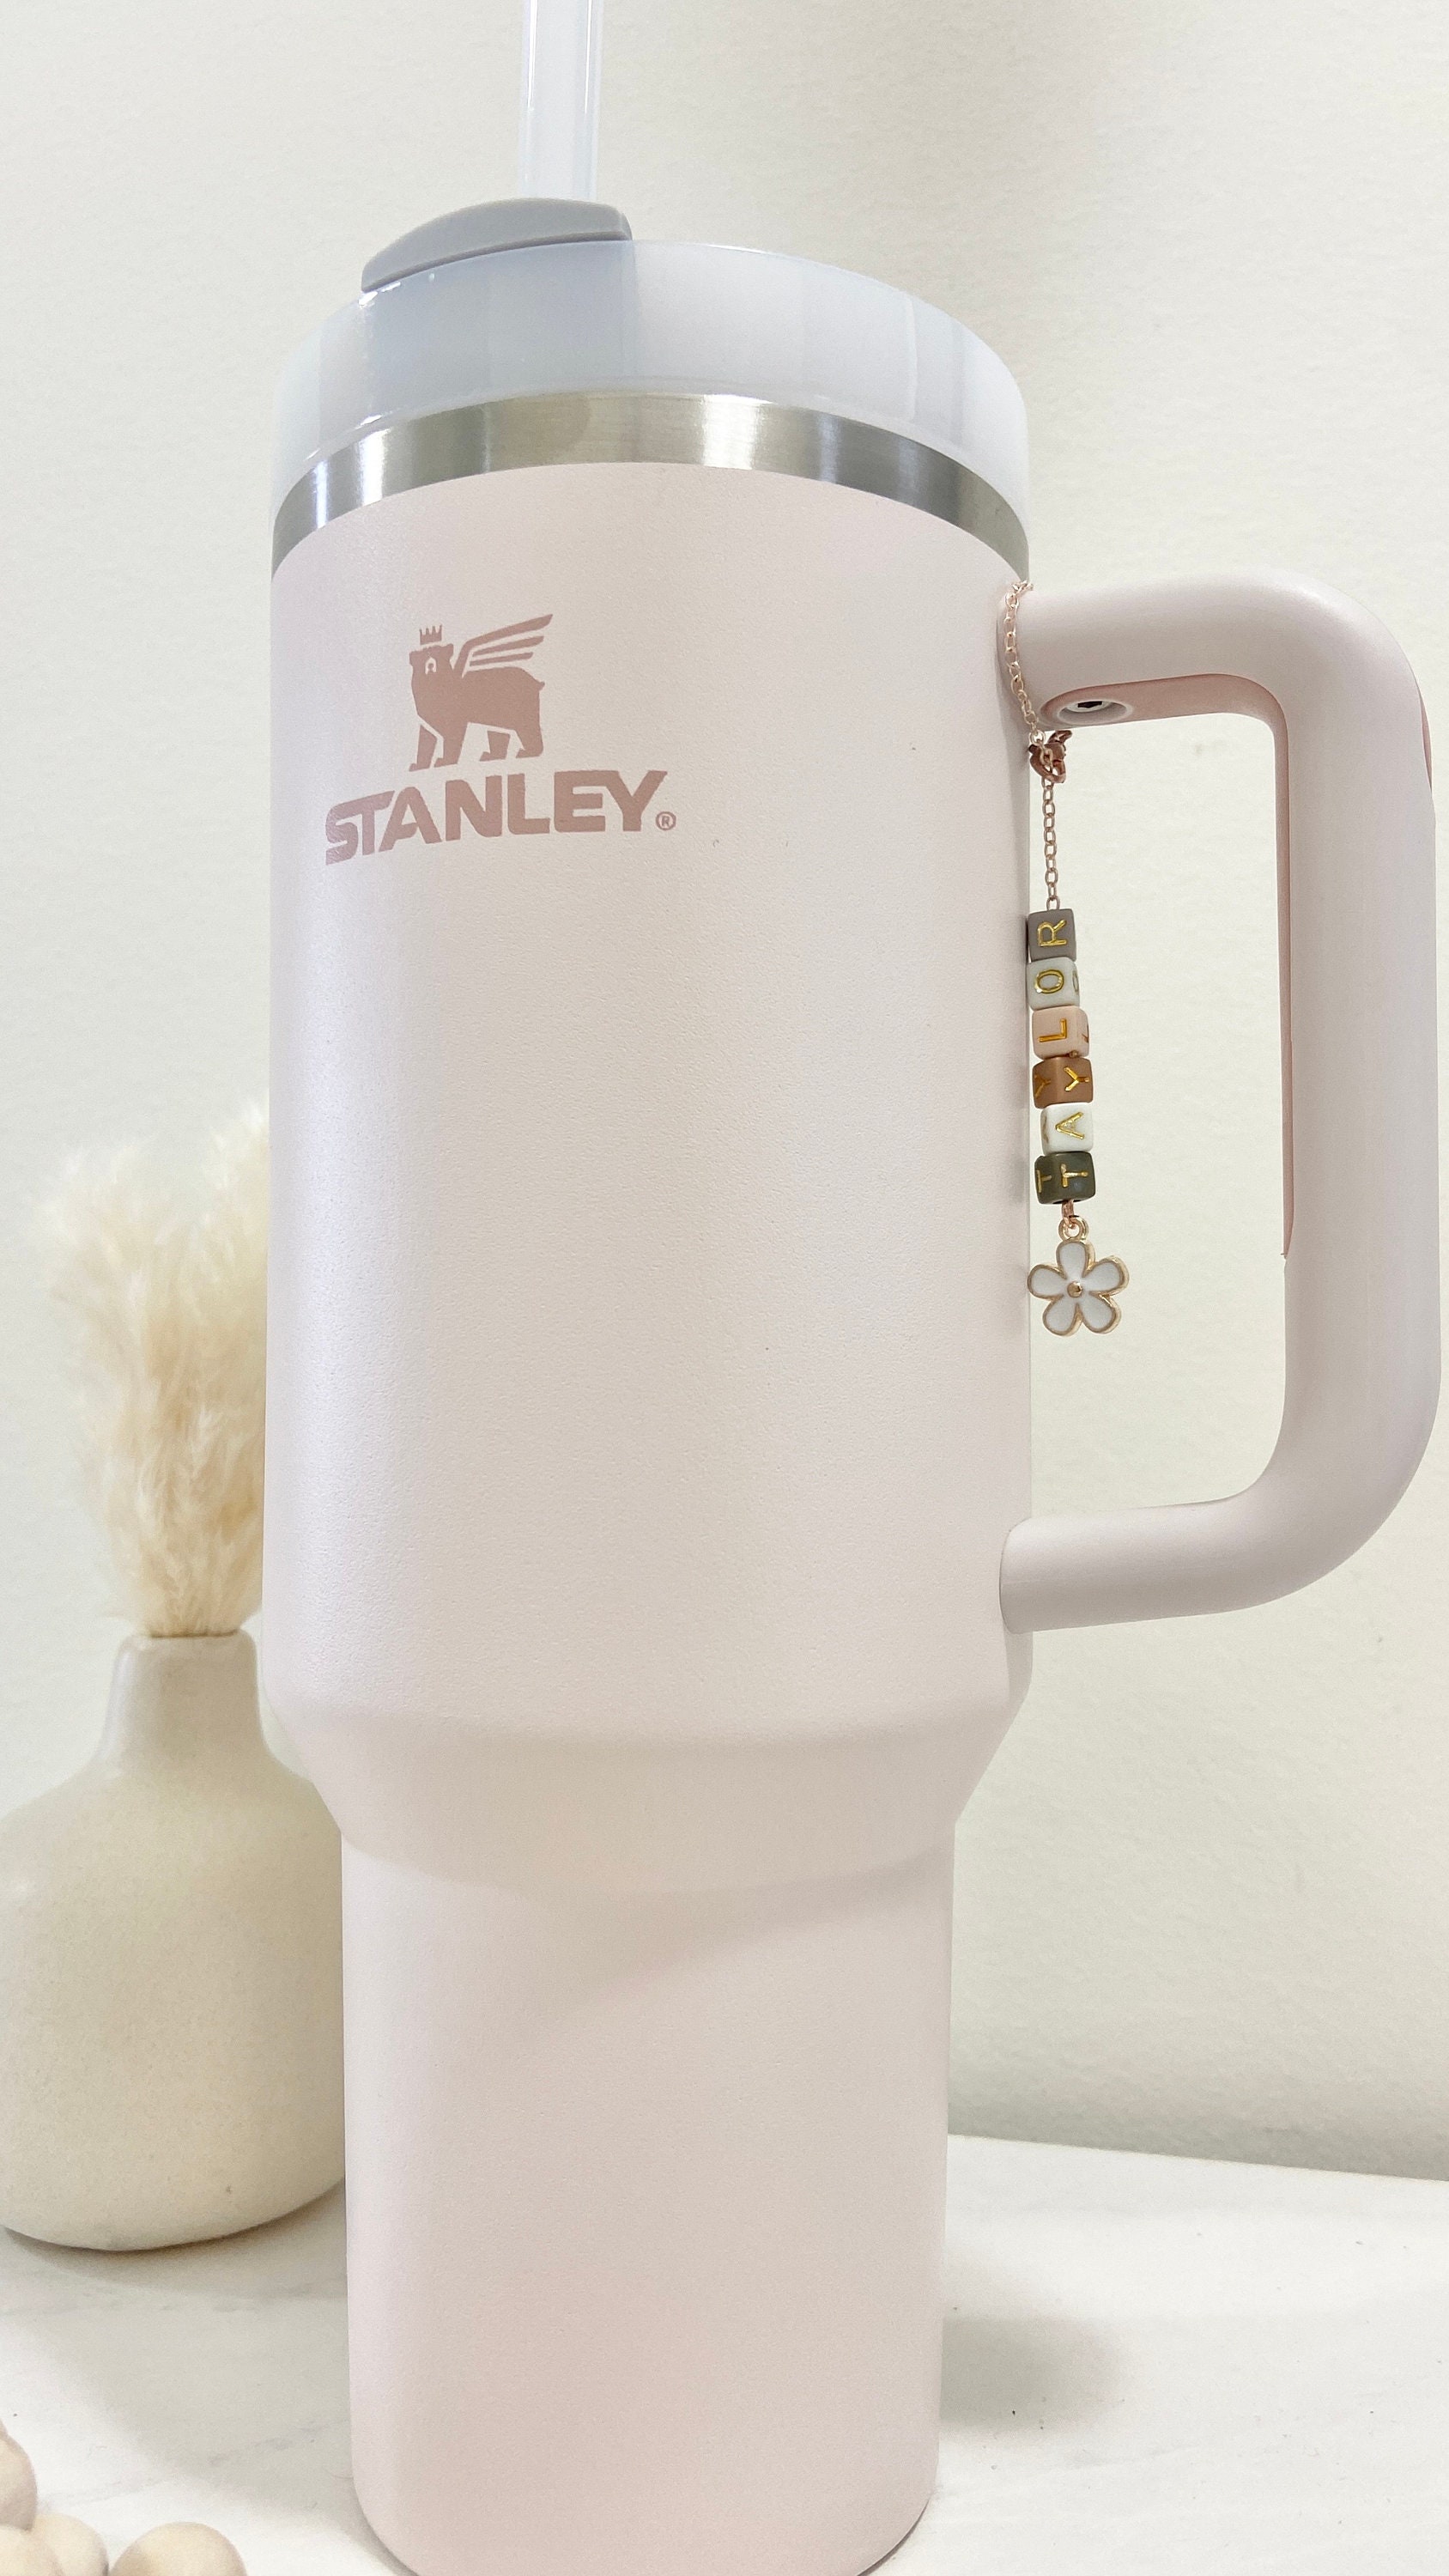 TMNovo Stanley Charms Premium Gift Box, Stanley Cup Charms For Handle